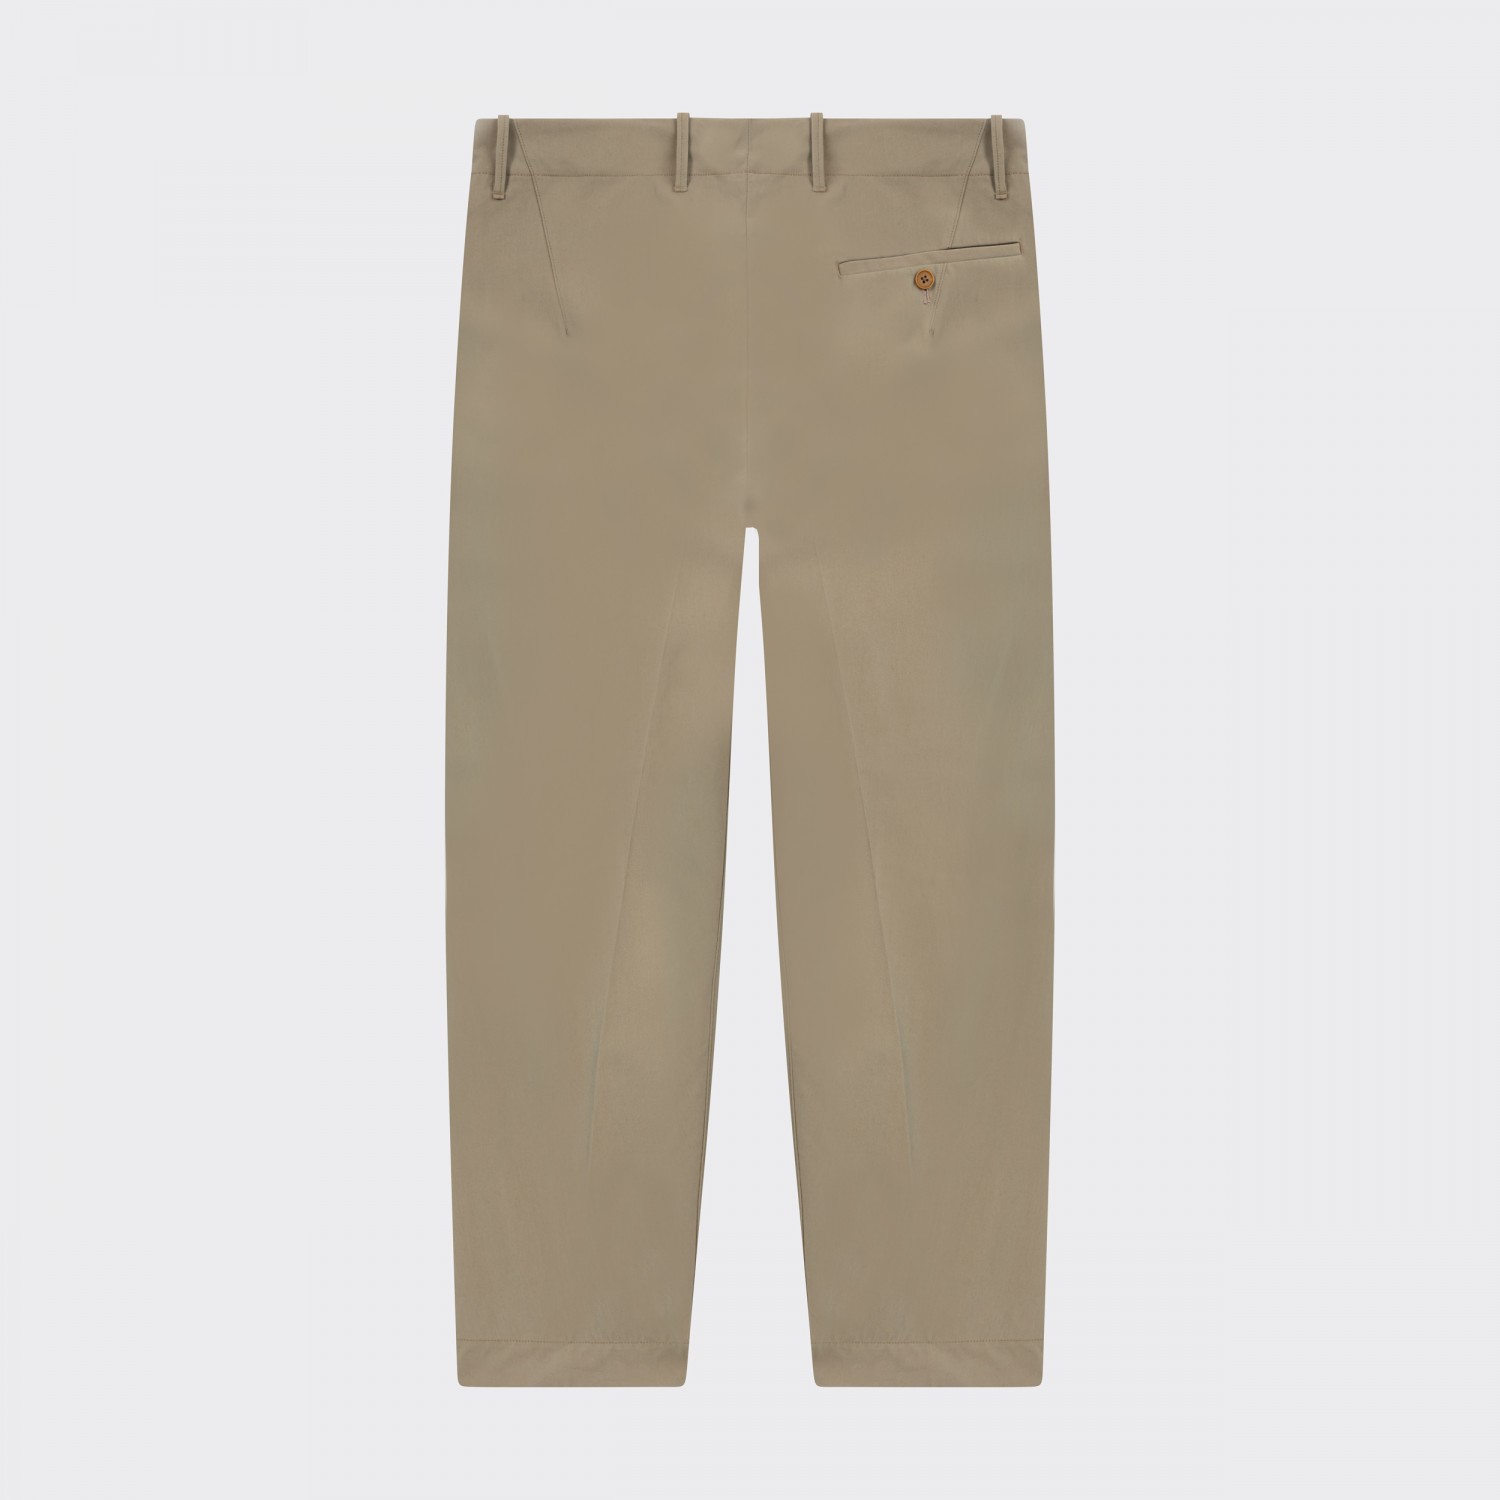 Sewn Pants  fits the GUYS from  Dawn or Pippa  Olive Green 